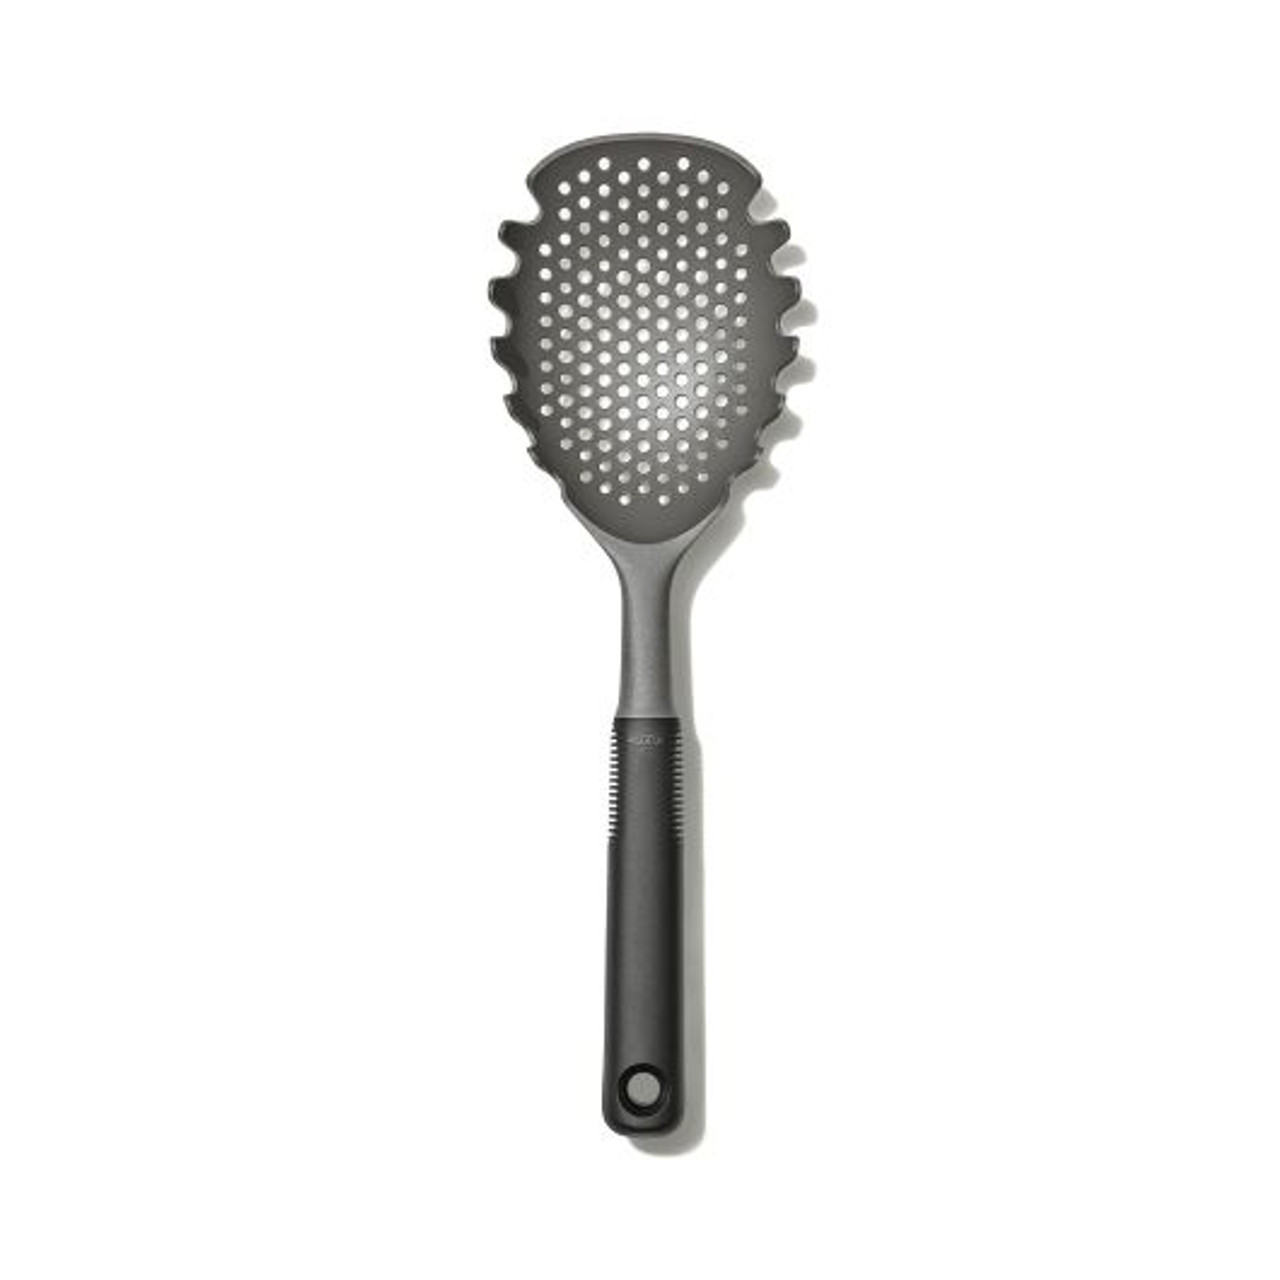 OXO Good Grips Silicone Sink Strainer, Black